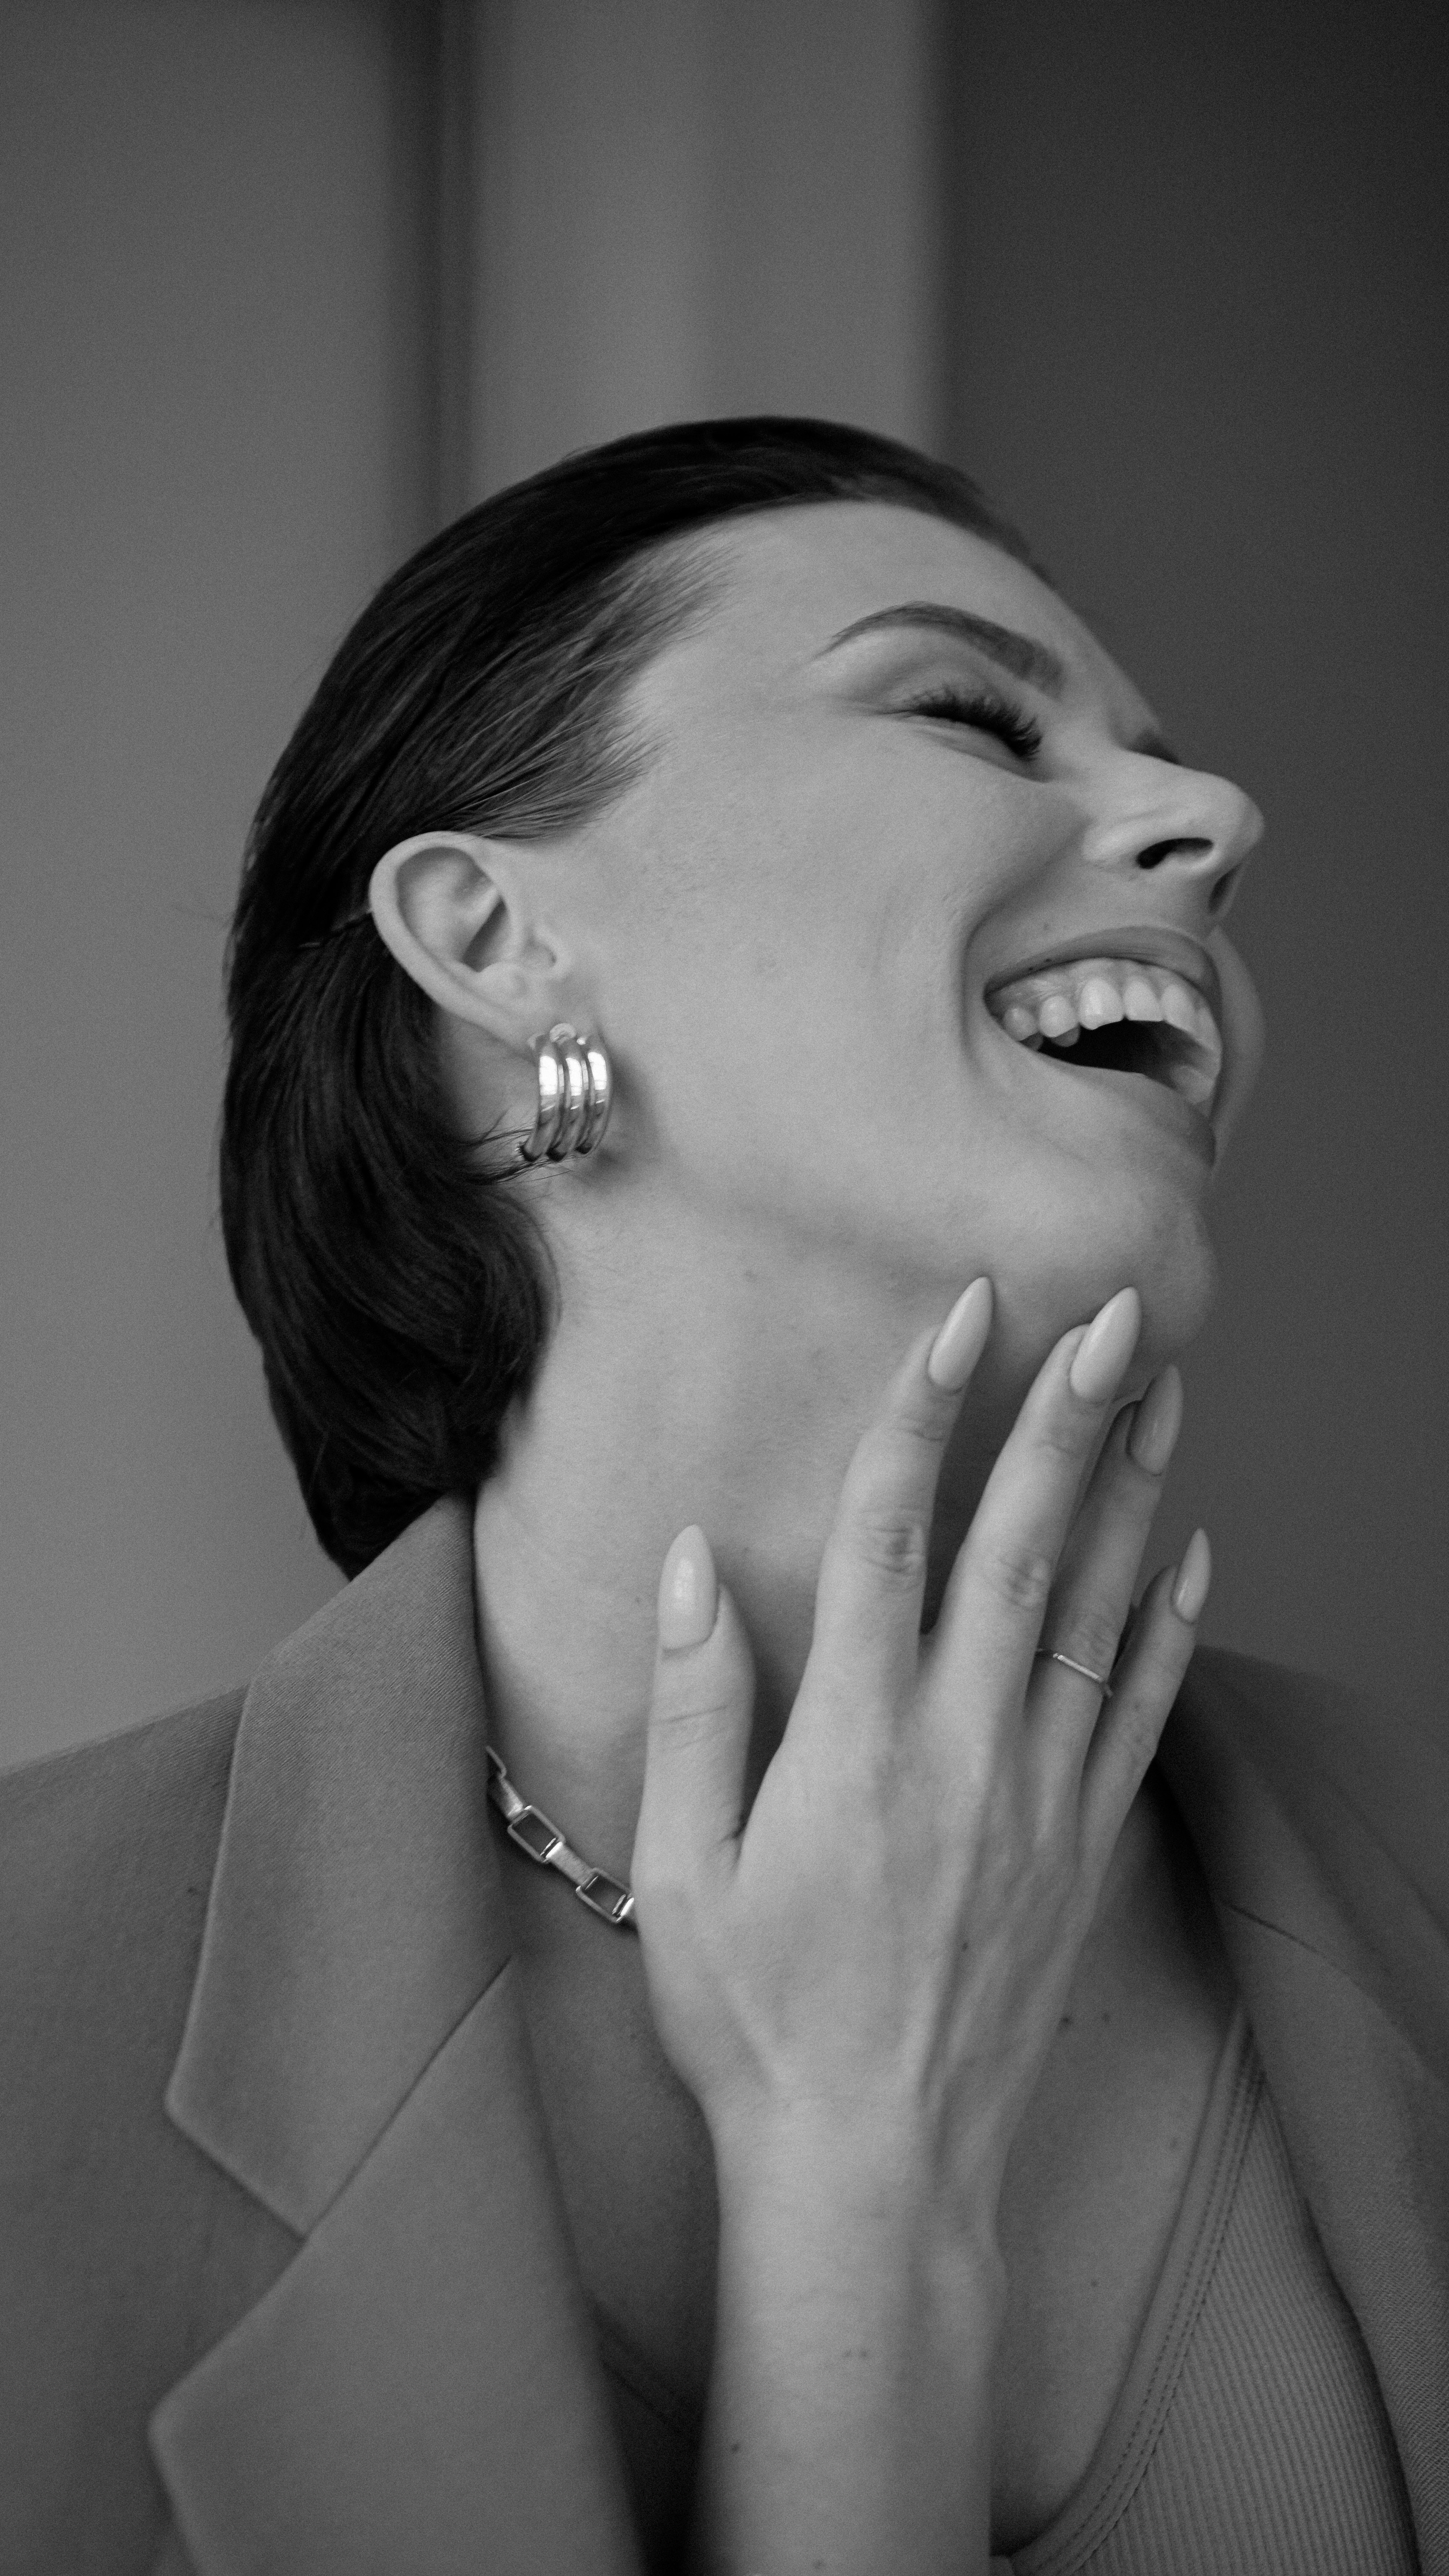 A woman laughing. | Source: Pexels